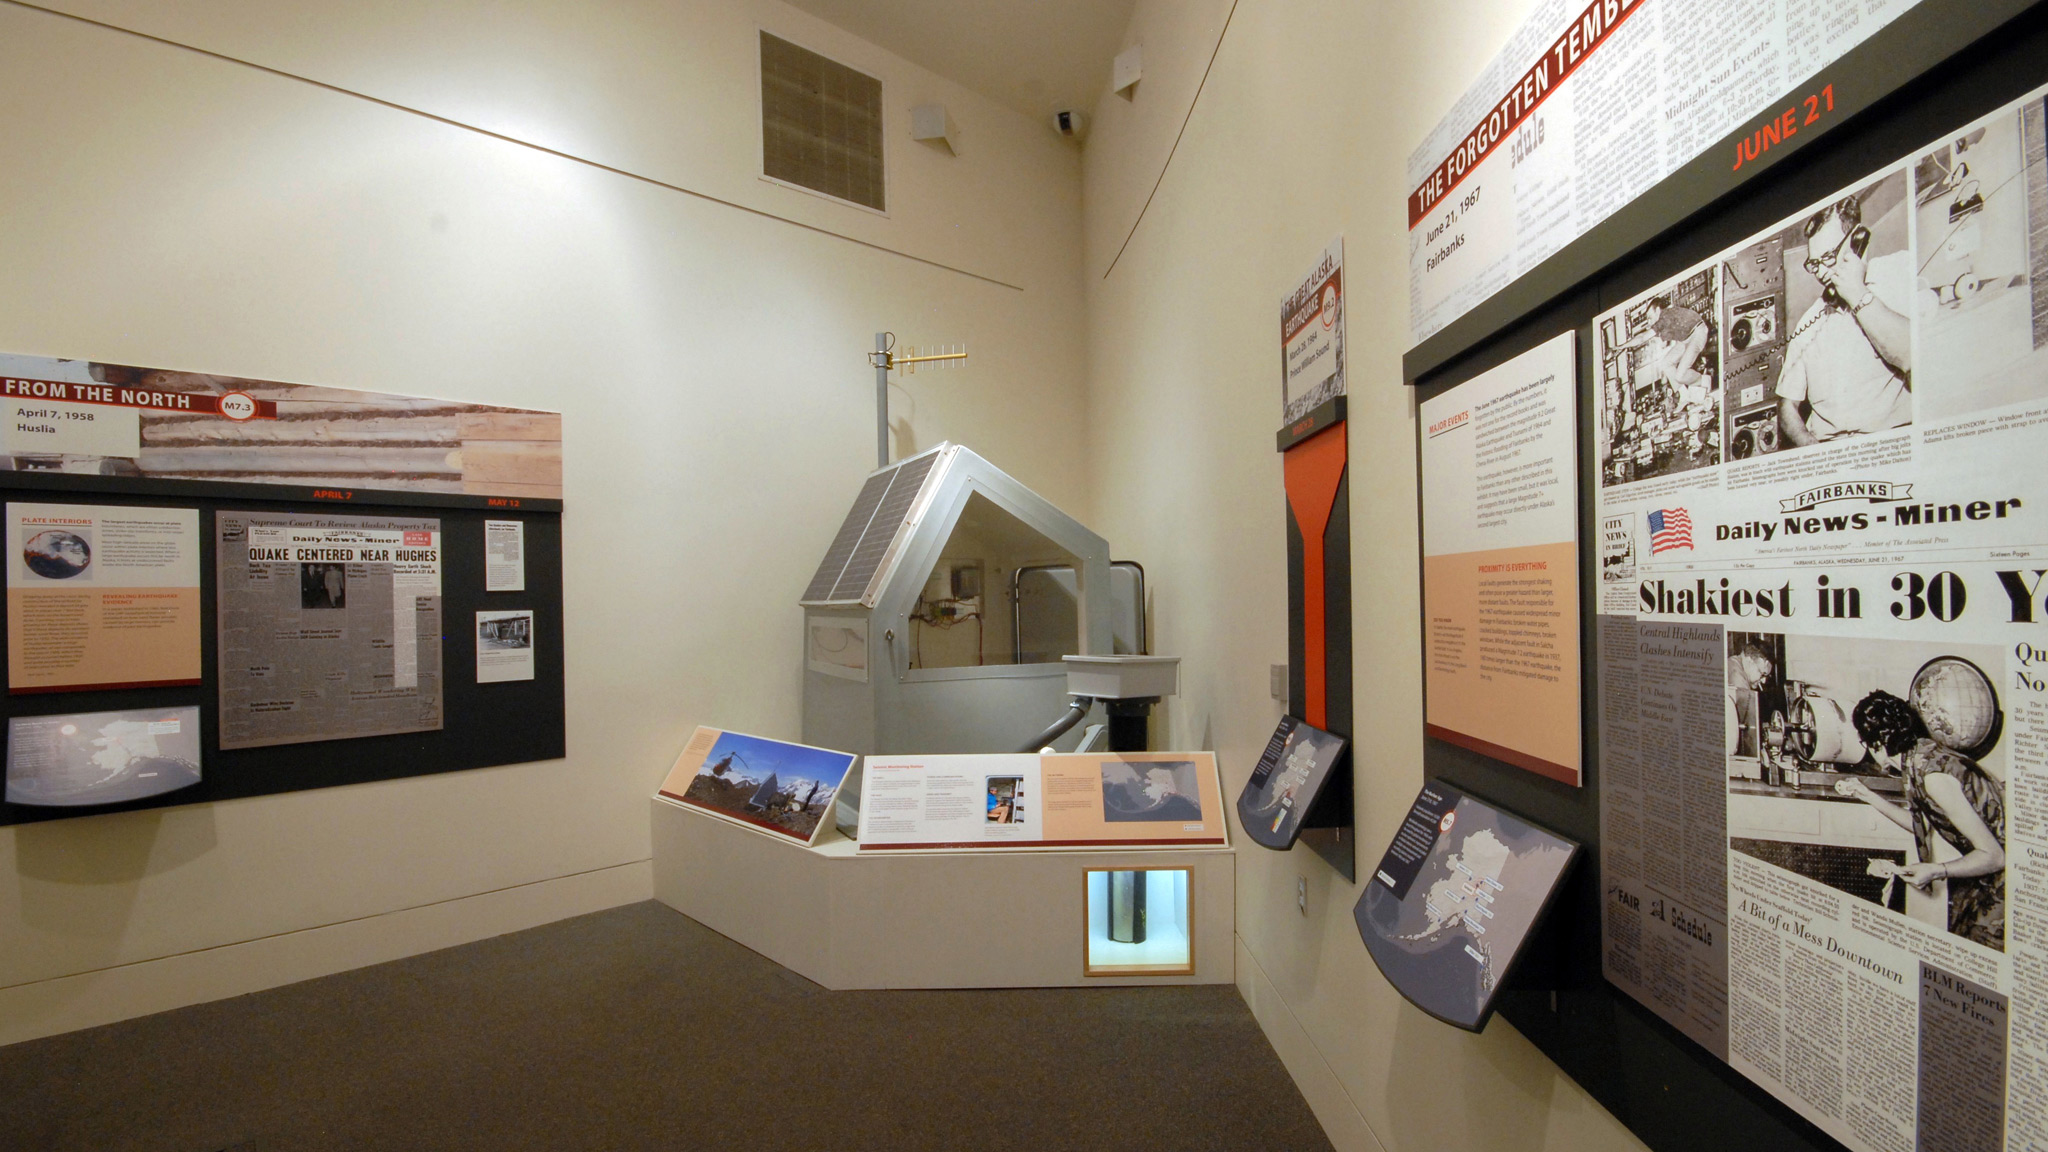 Looking towards the eastern tip of the gallery at the retired earthquake hut and seismometer on exhibit.